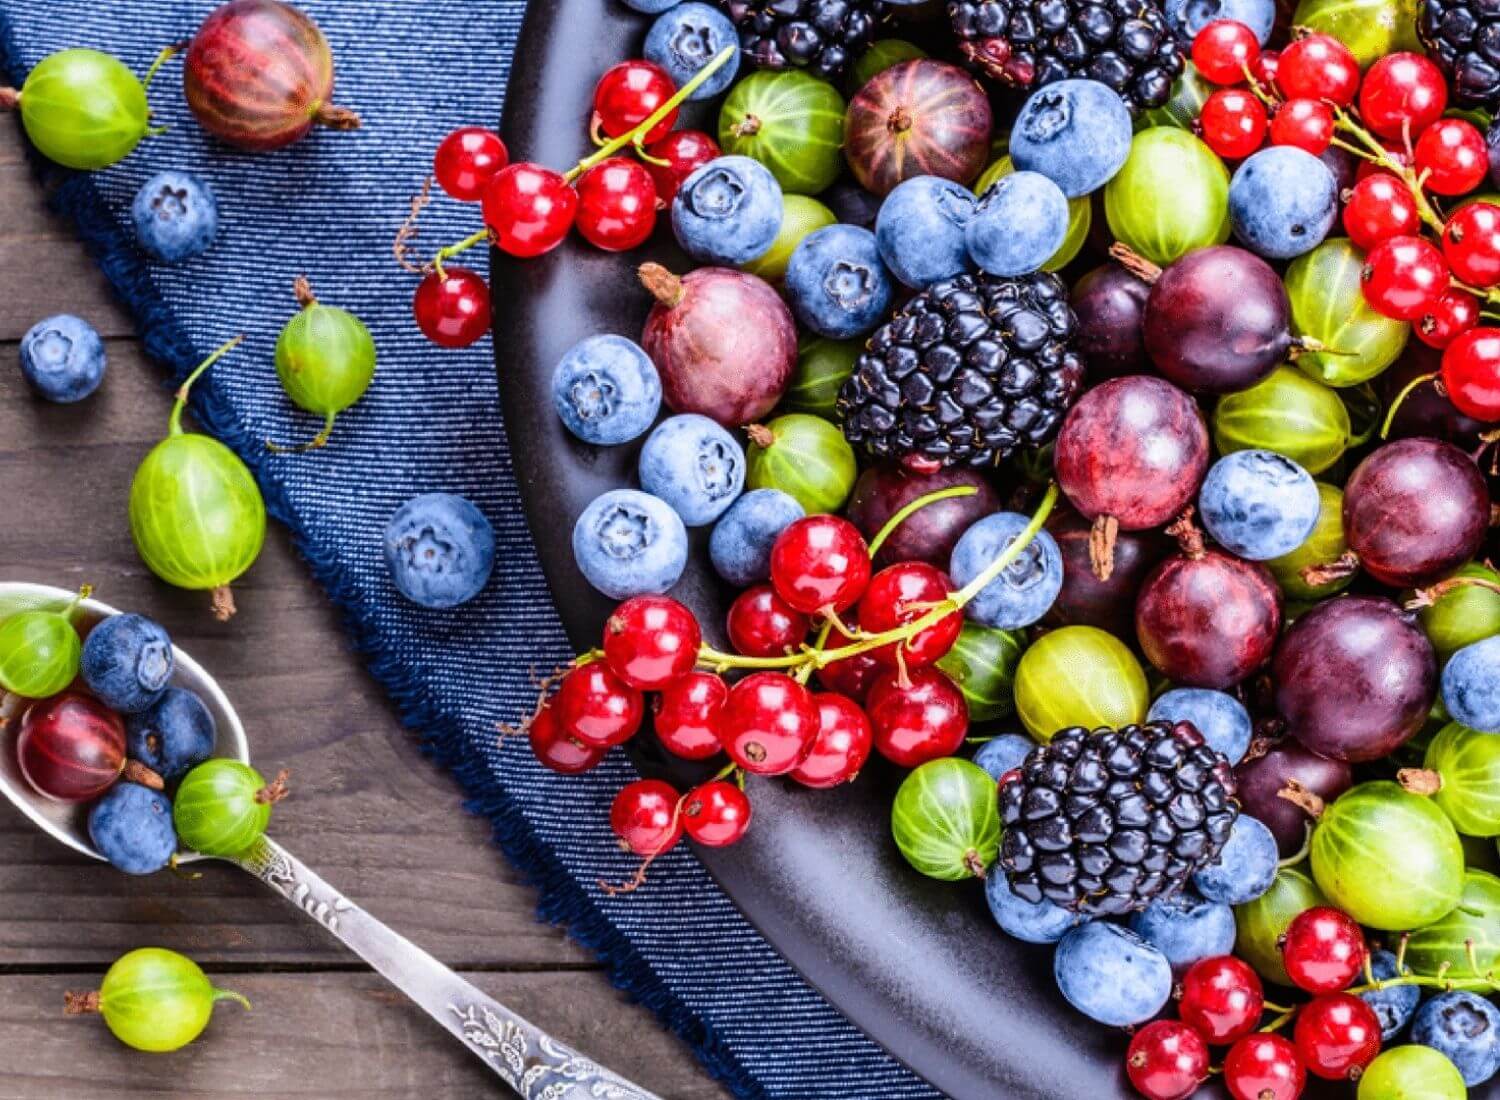 15 Types Of Berries: Wish You A Berry Happy Day!